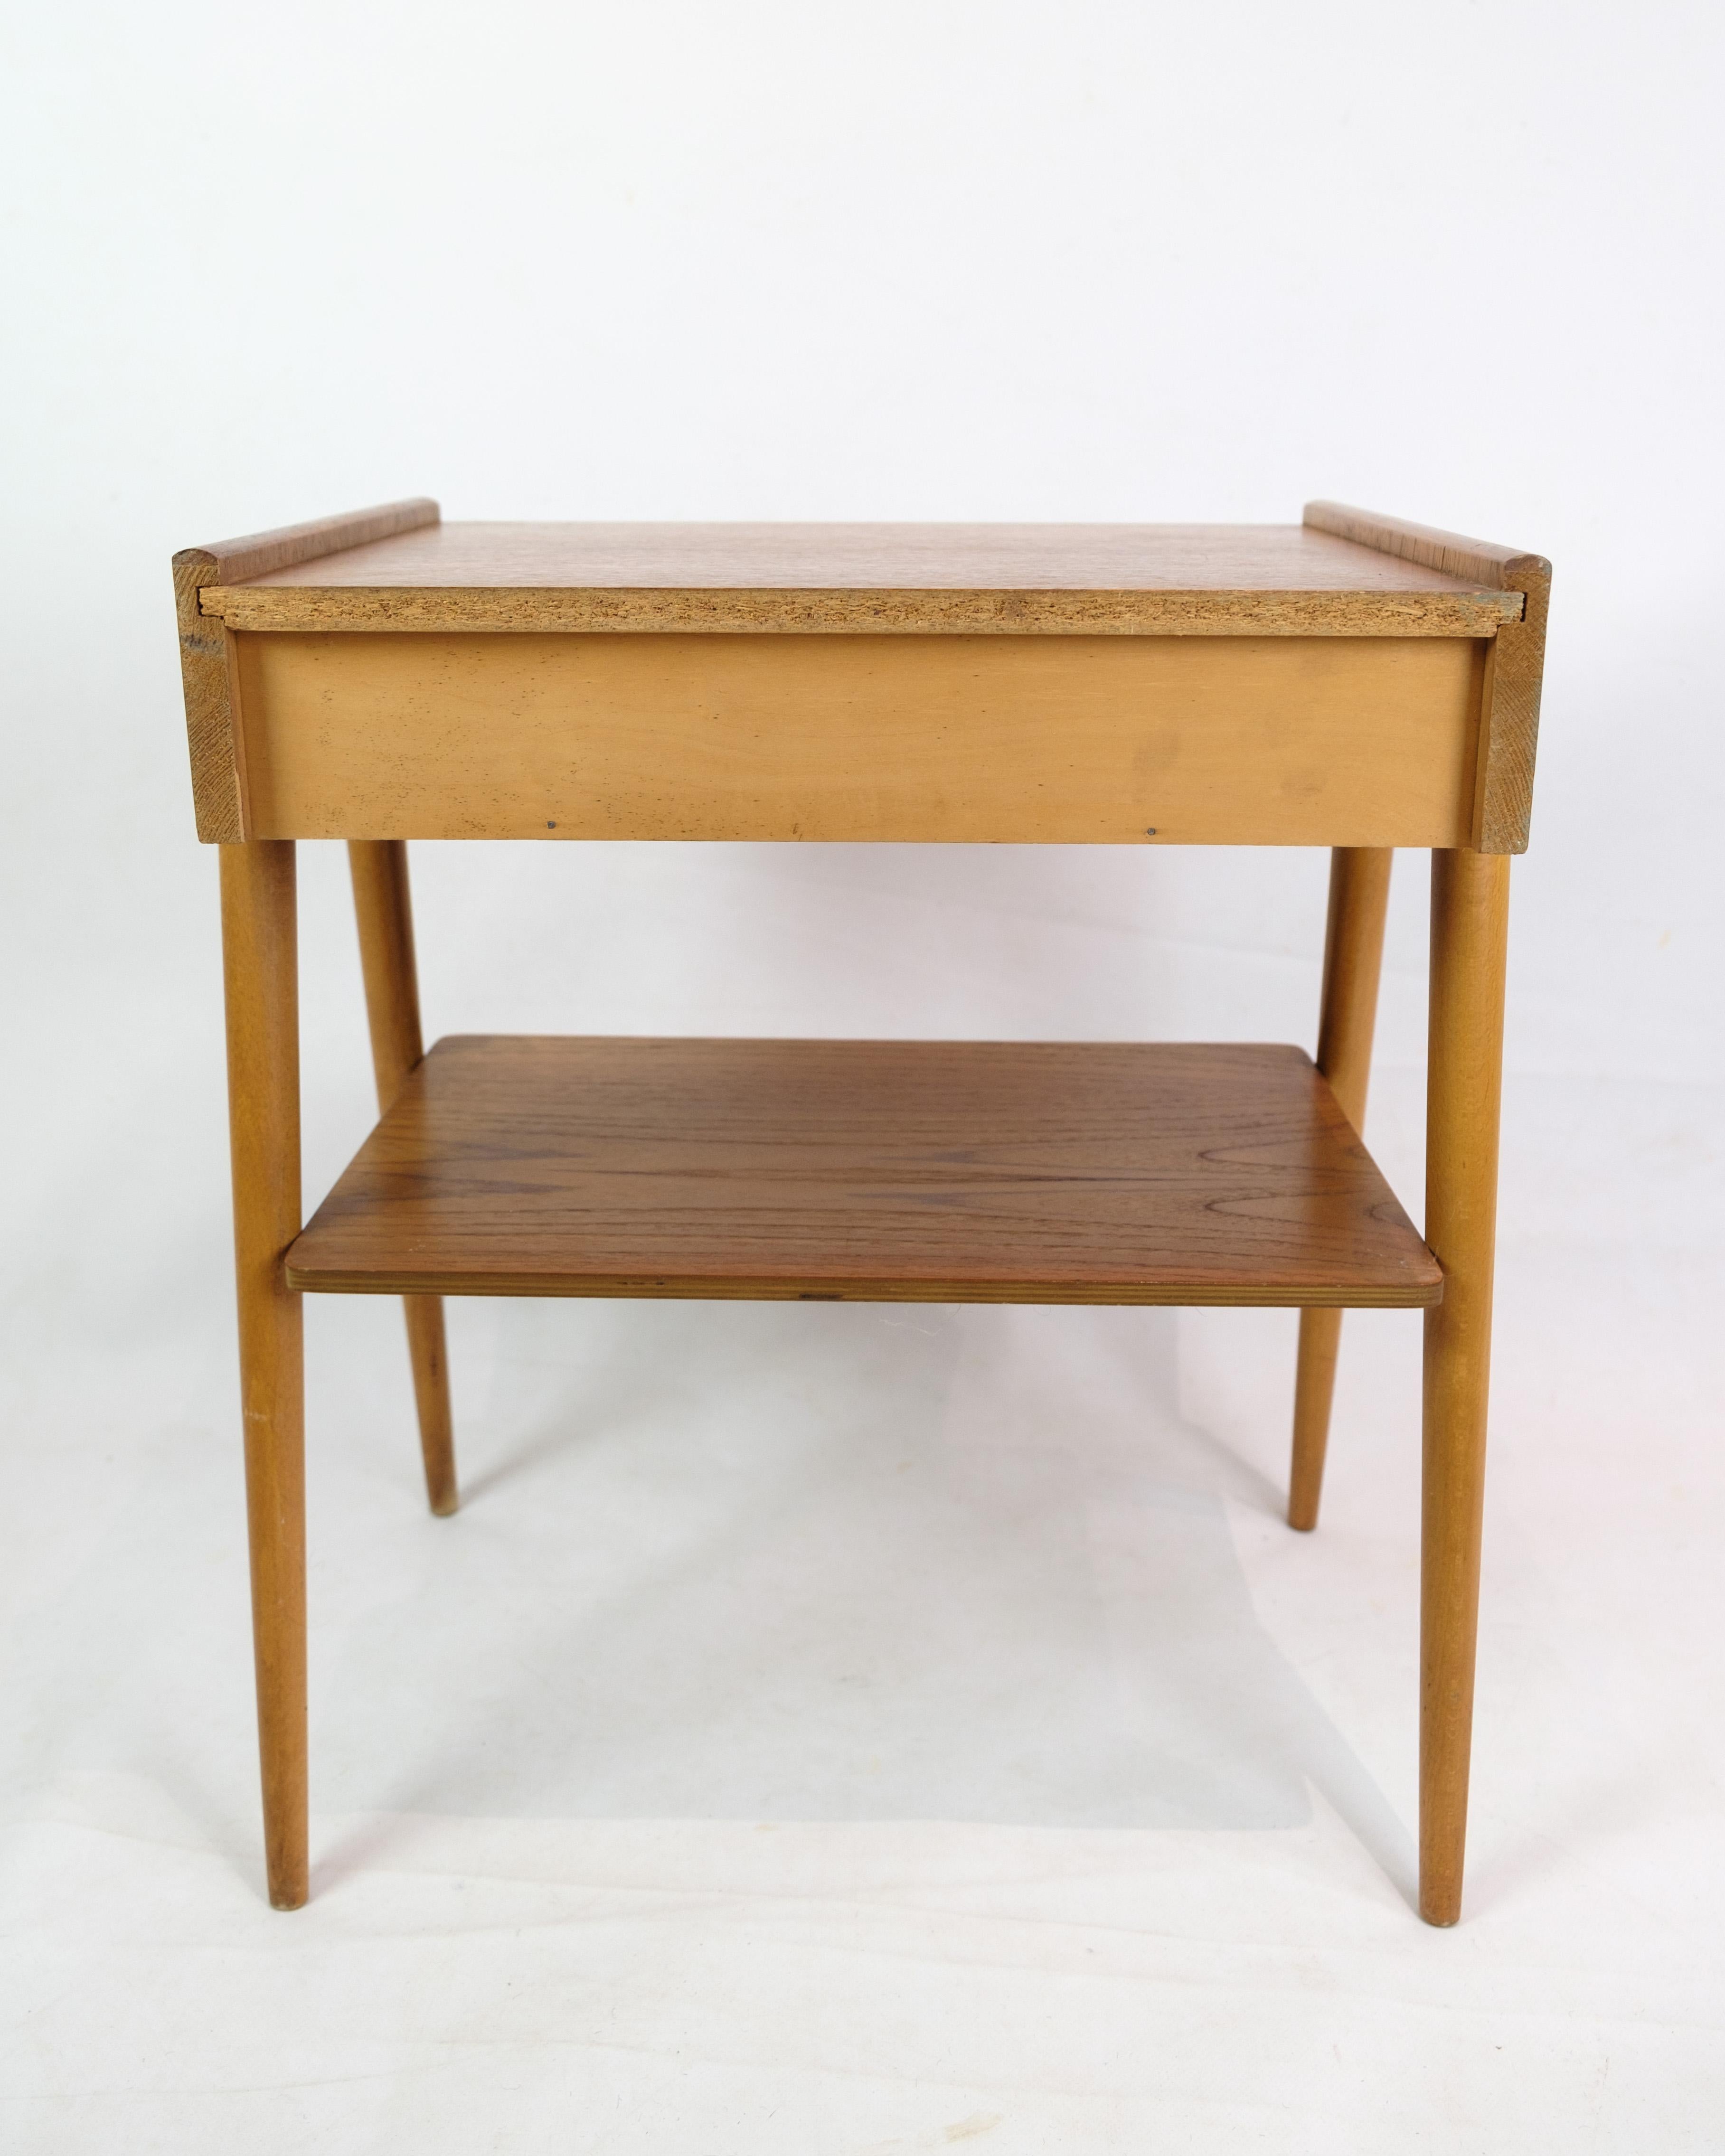 Set of Nightstands In Teak, By AB Carlström & Co Furniture Factory From 1950s For Sale 6